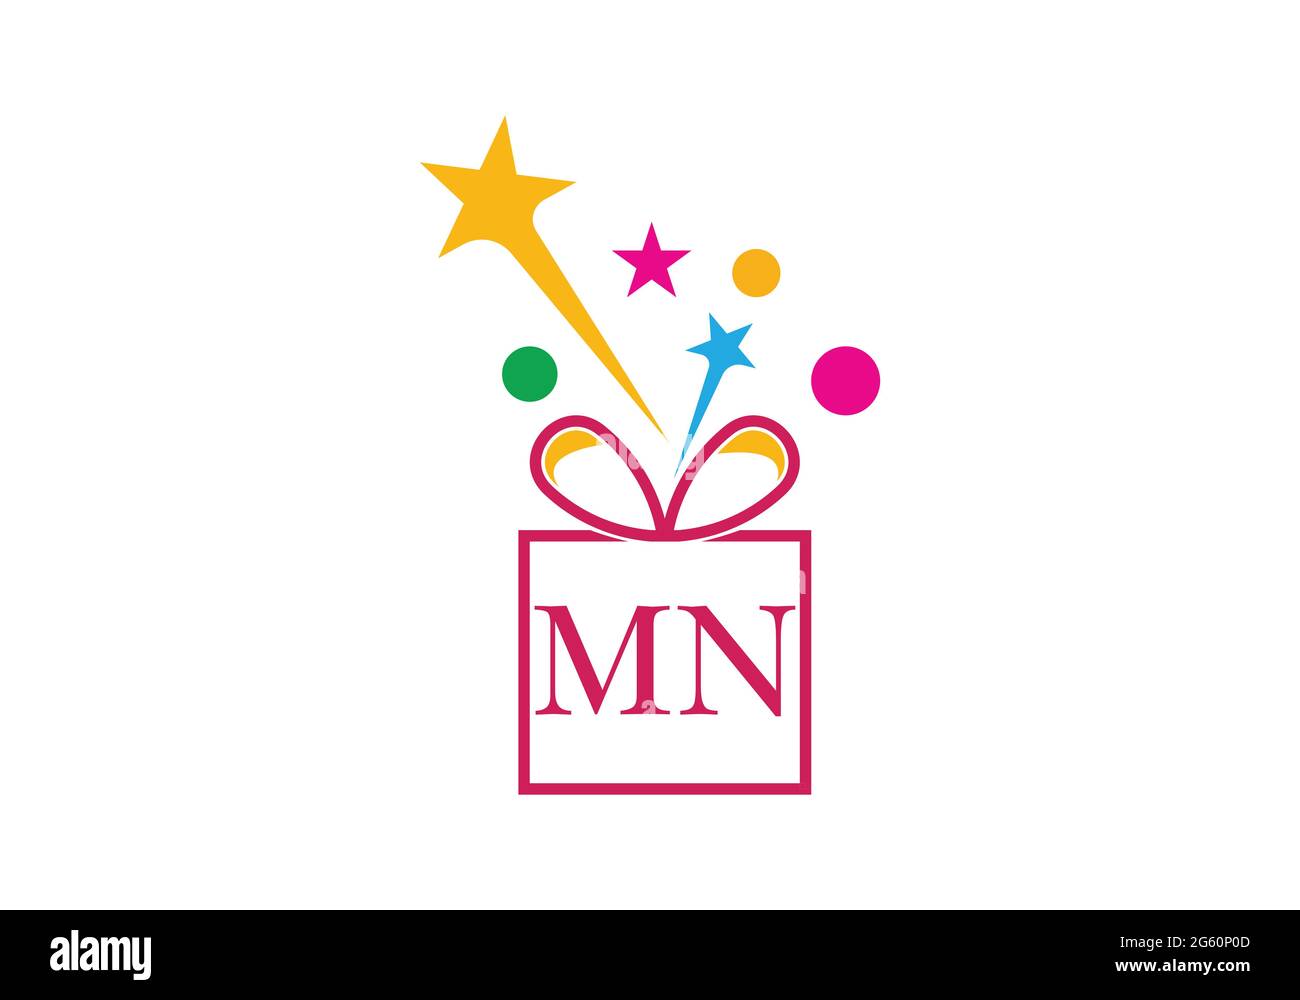 Gift Box, gift shop letter alphabet M N logo icon for Luxury brand design for wedding invitations, greeting card, logo, and other design. Stock Vector